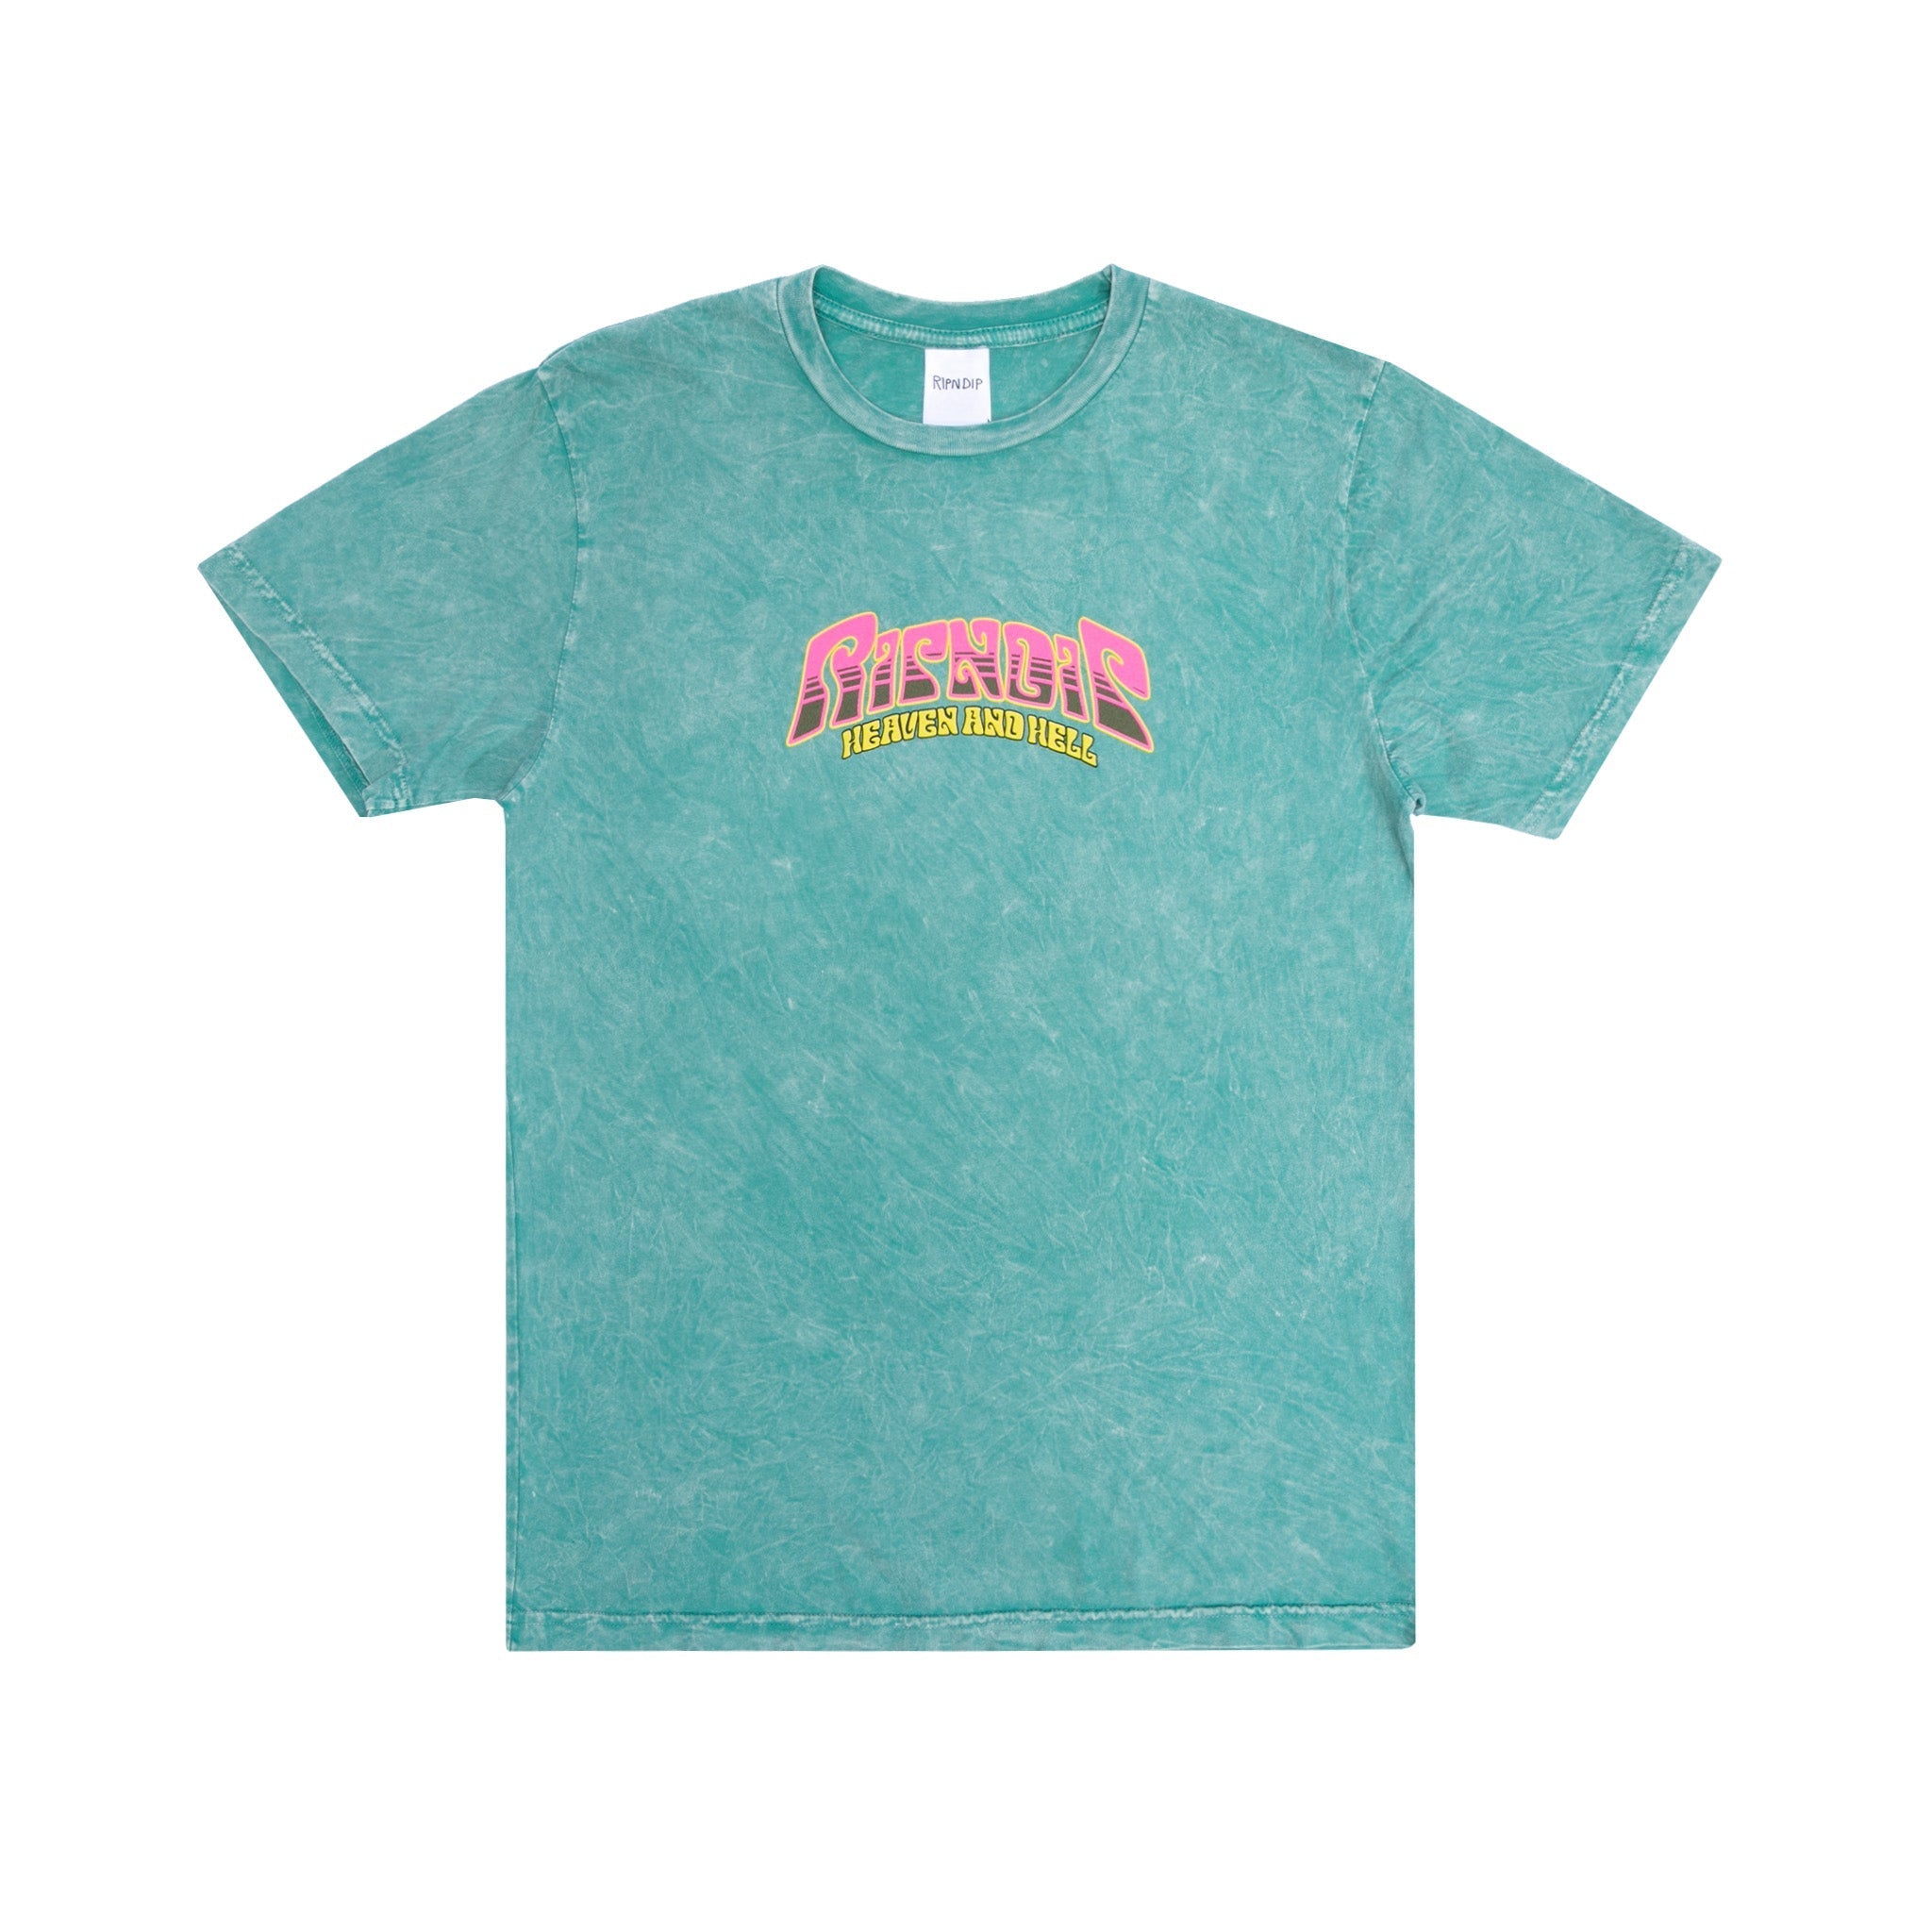 Heaven And Heck Battle Tee (Teal Mineral Wash)